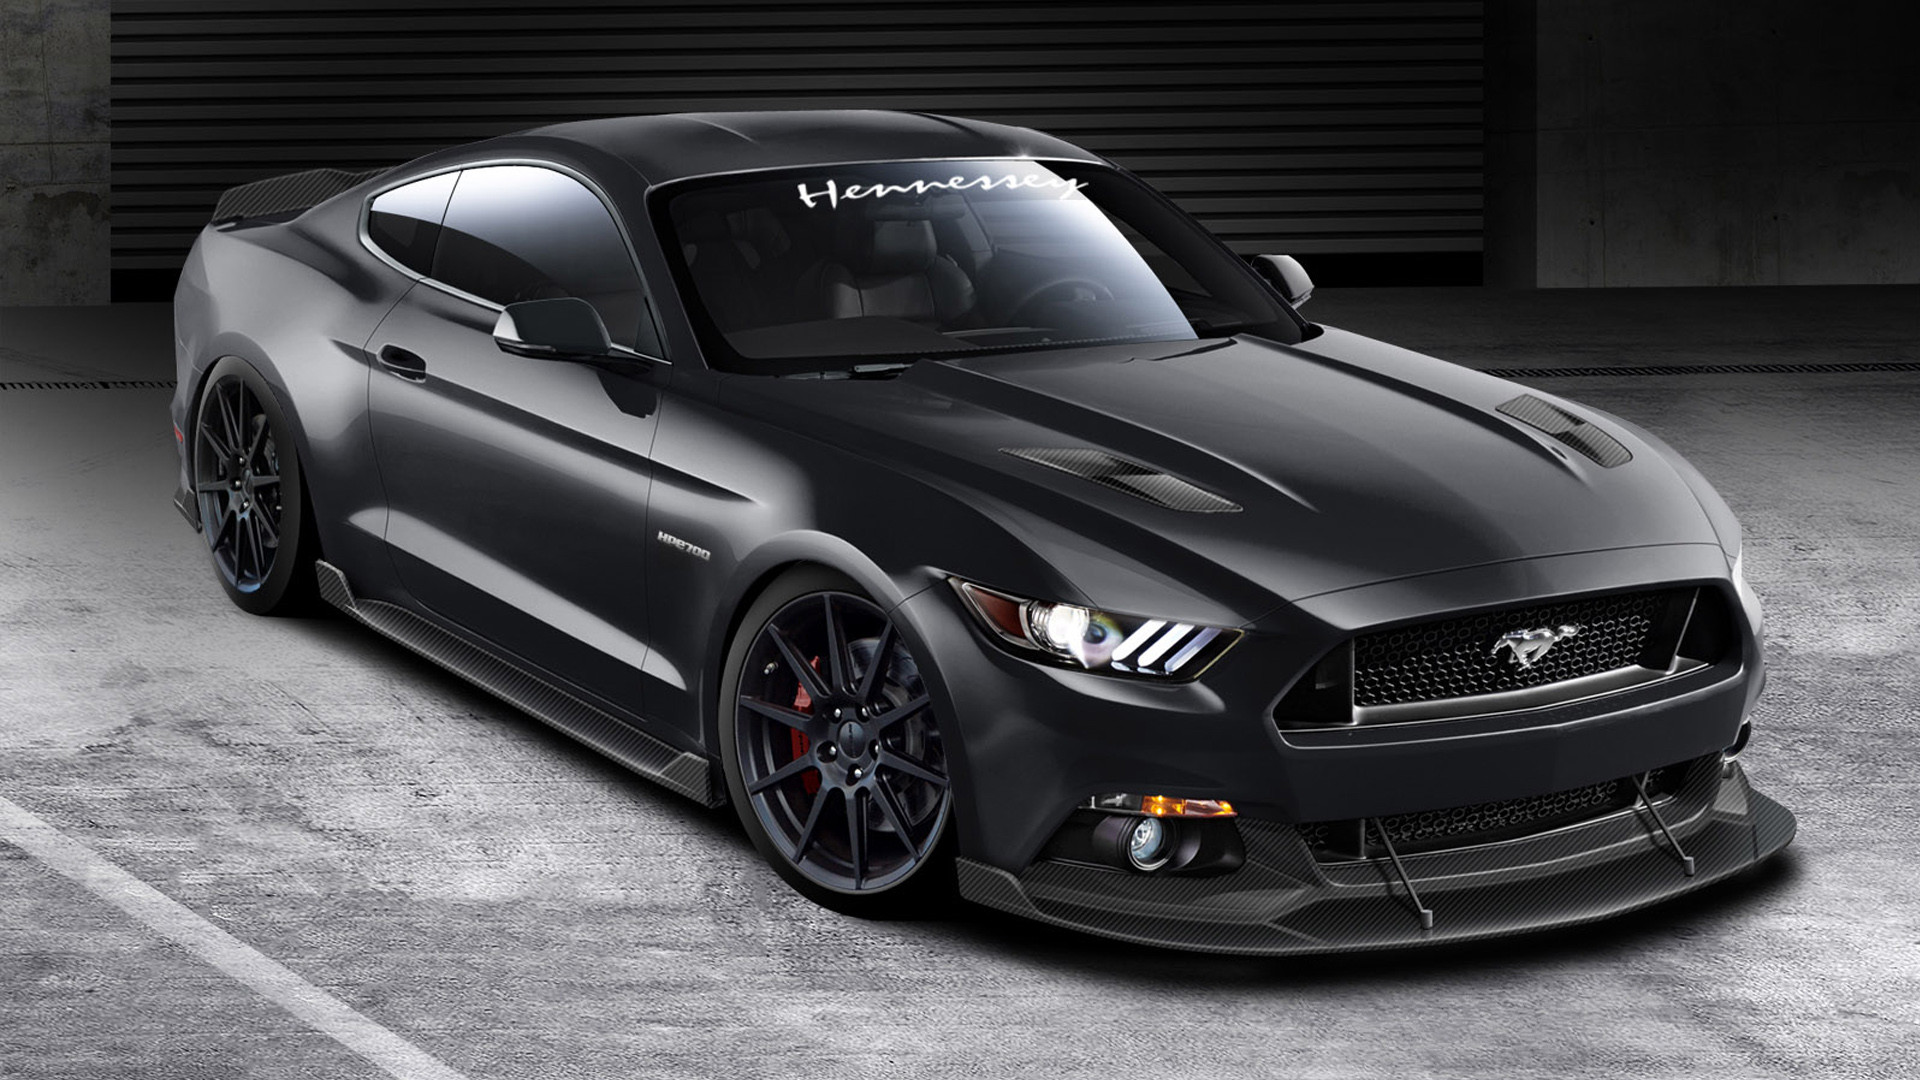 1920x1080 2015 Hennessey Ford Mustang Gt Hd. Download image